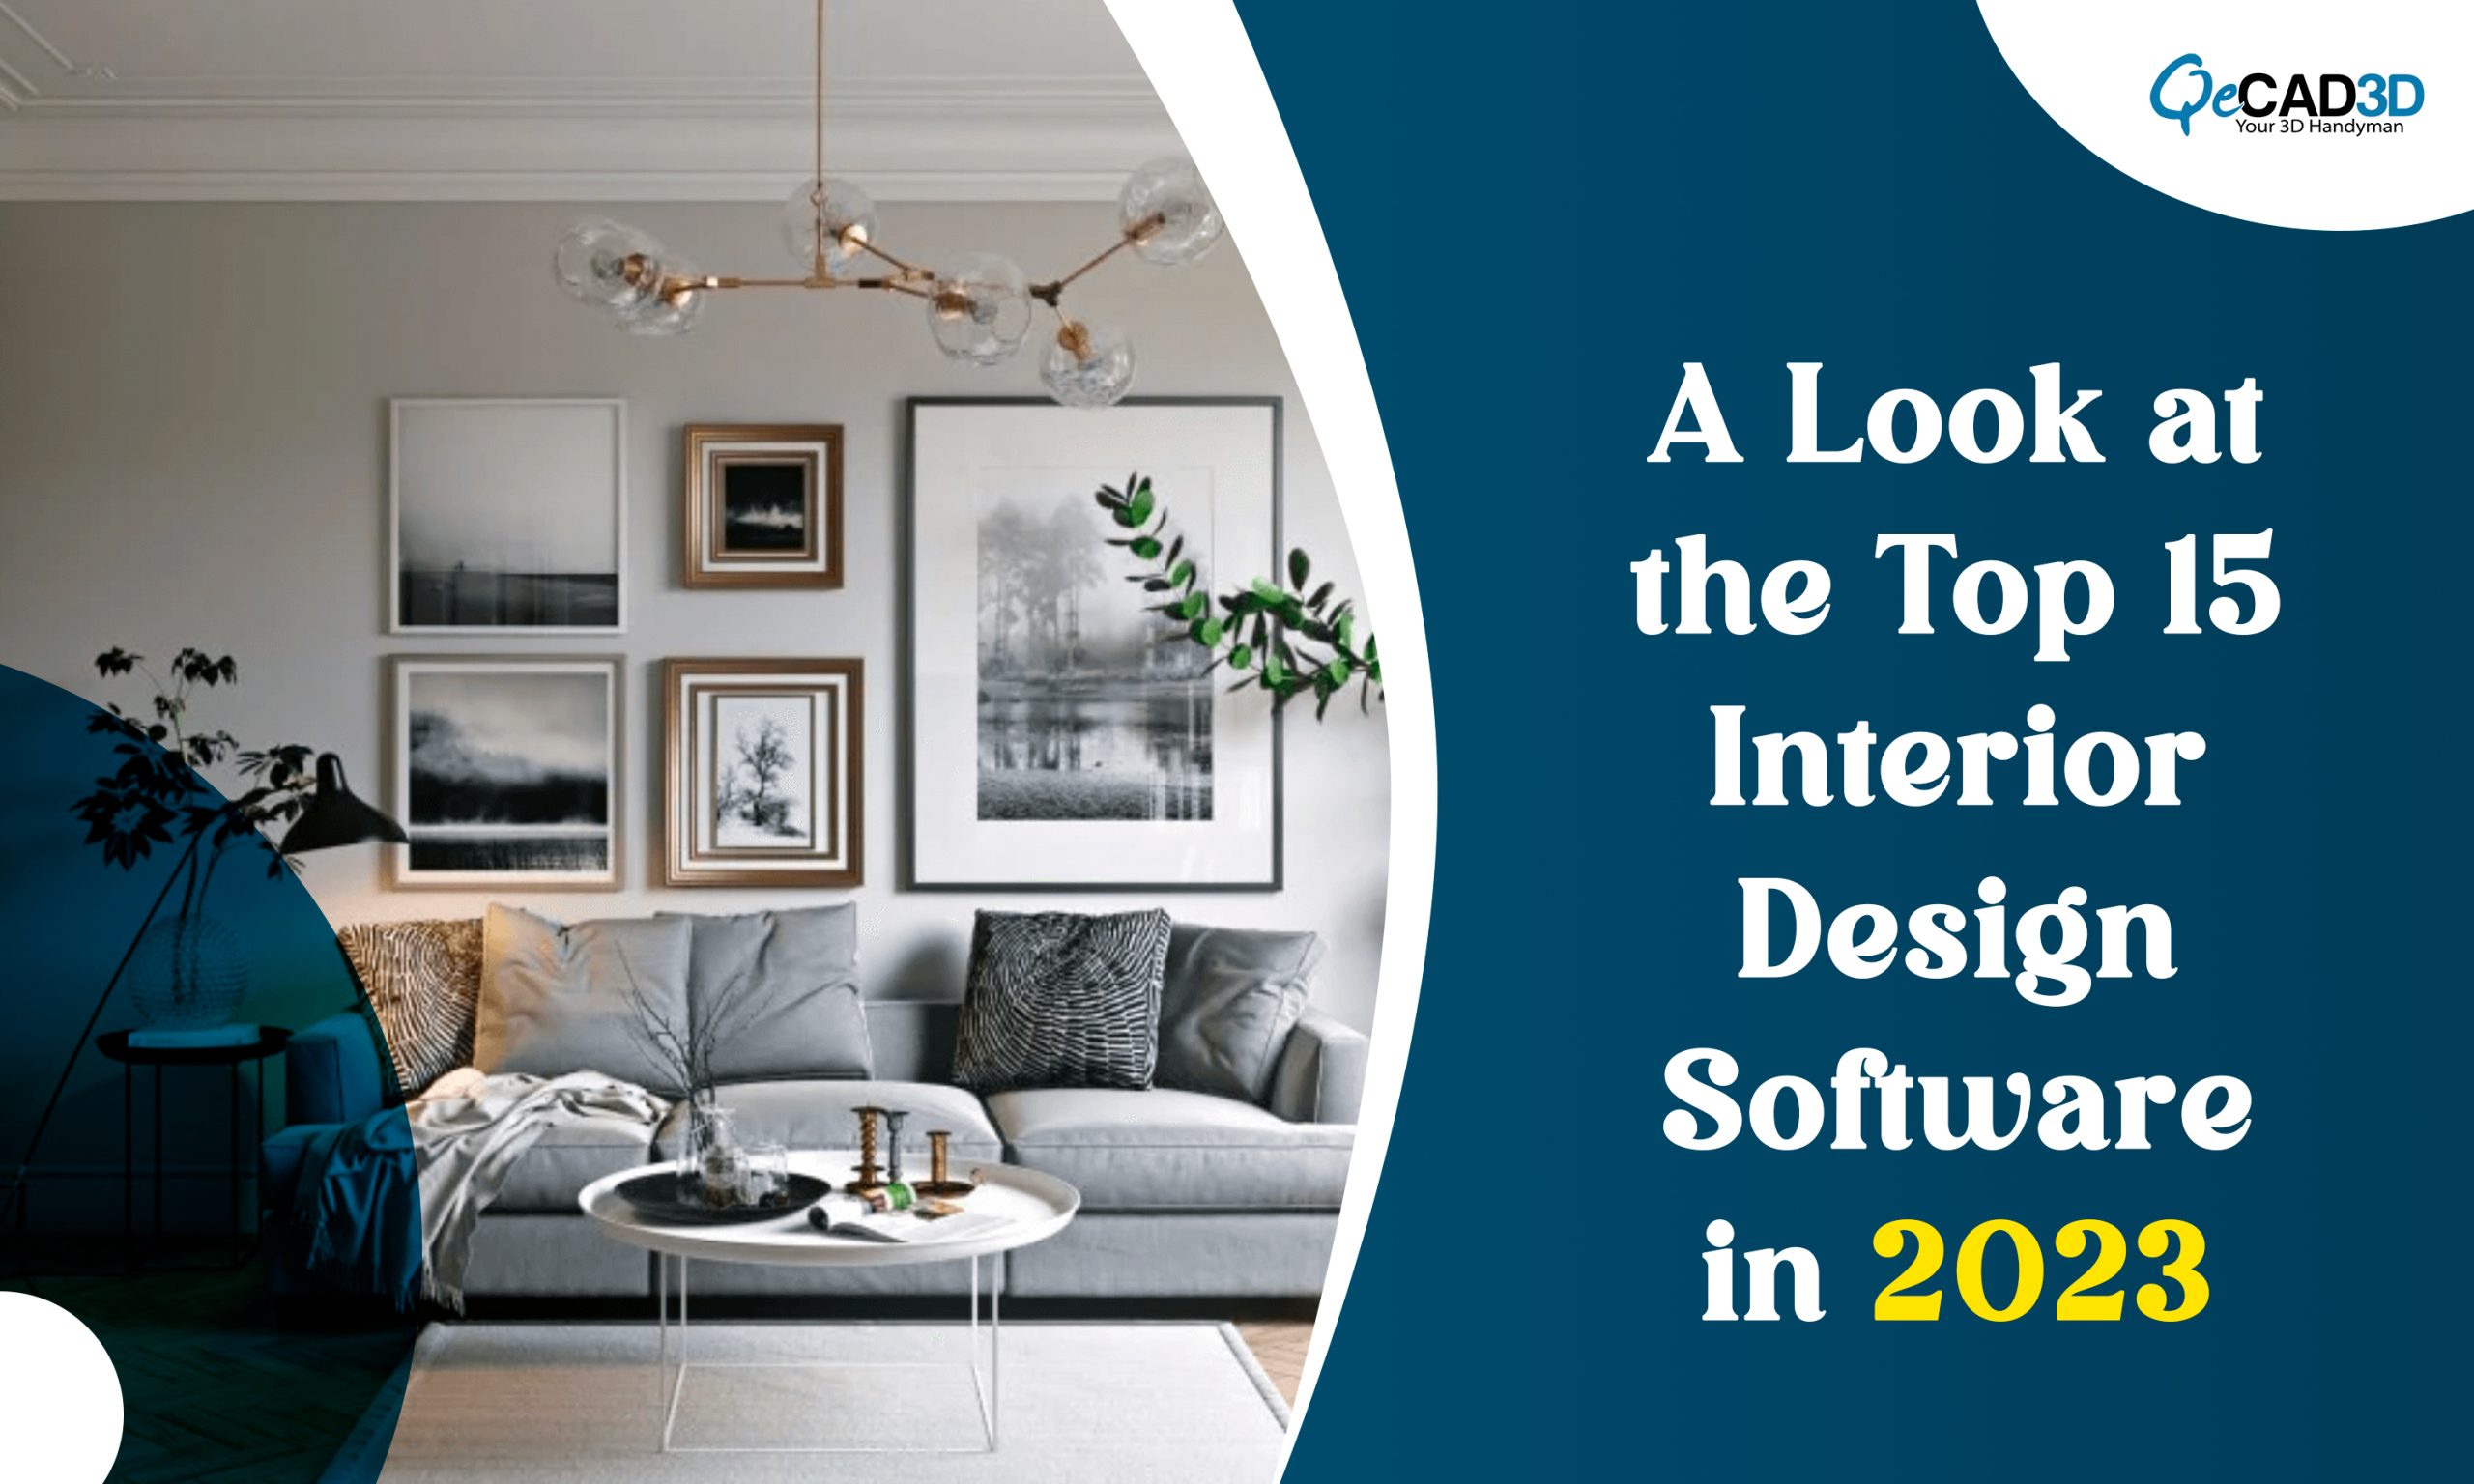 A Look at the Top 15 Interior Design Software in 2023